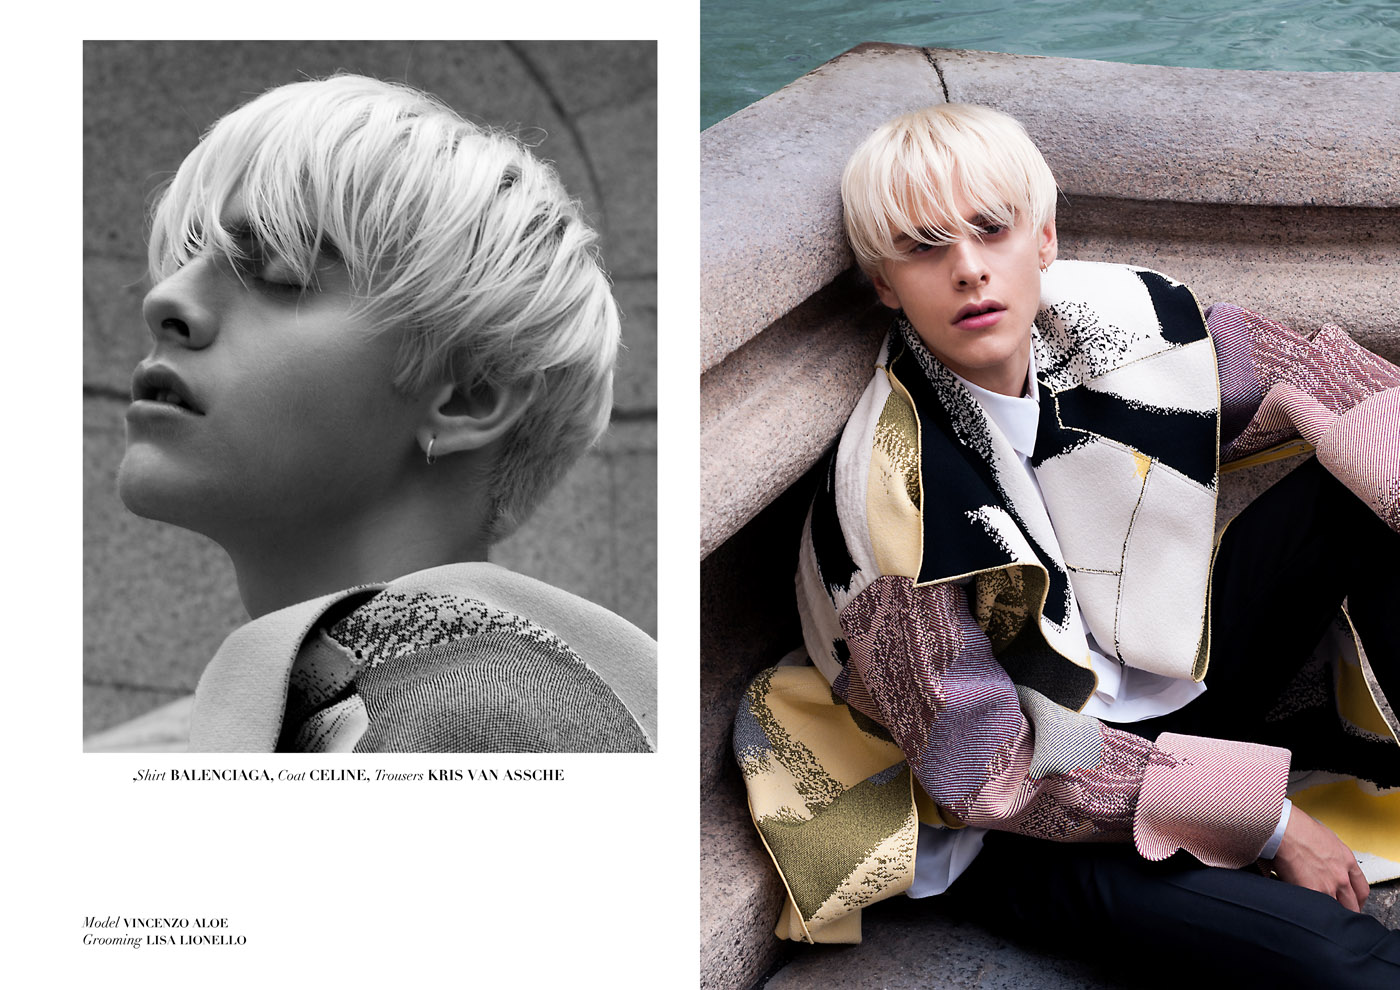 Vincenzo by Simone Lorusso for CHASSEUR MAGAZINE